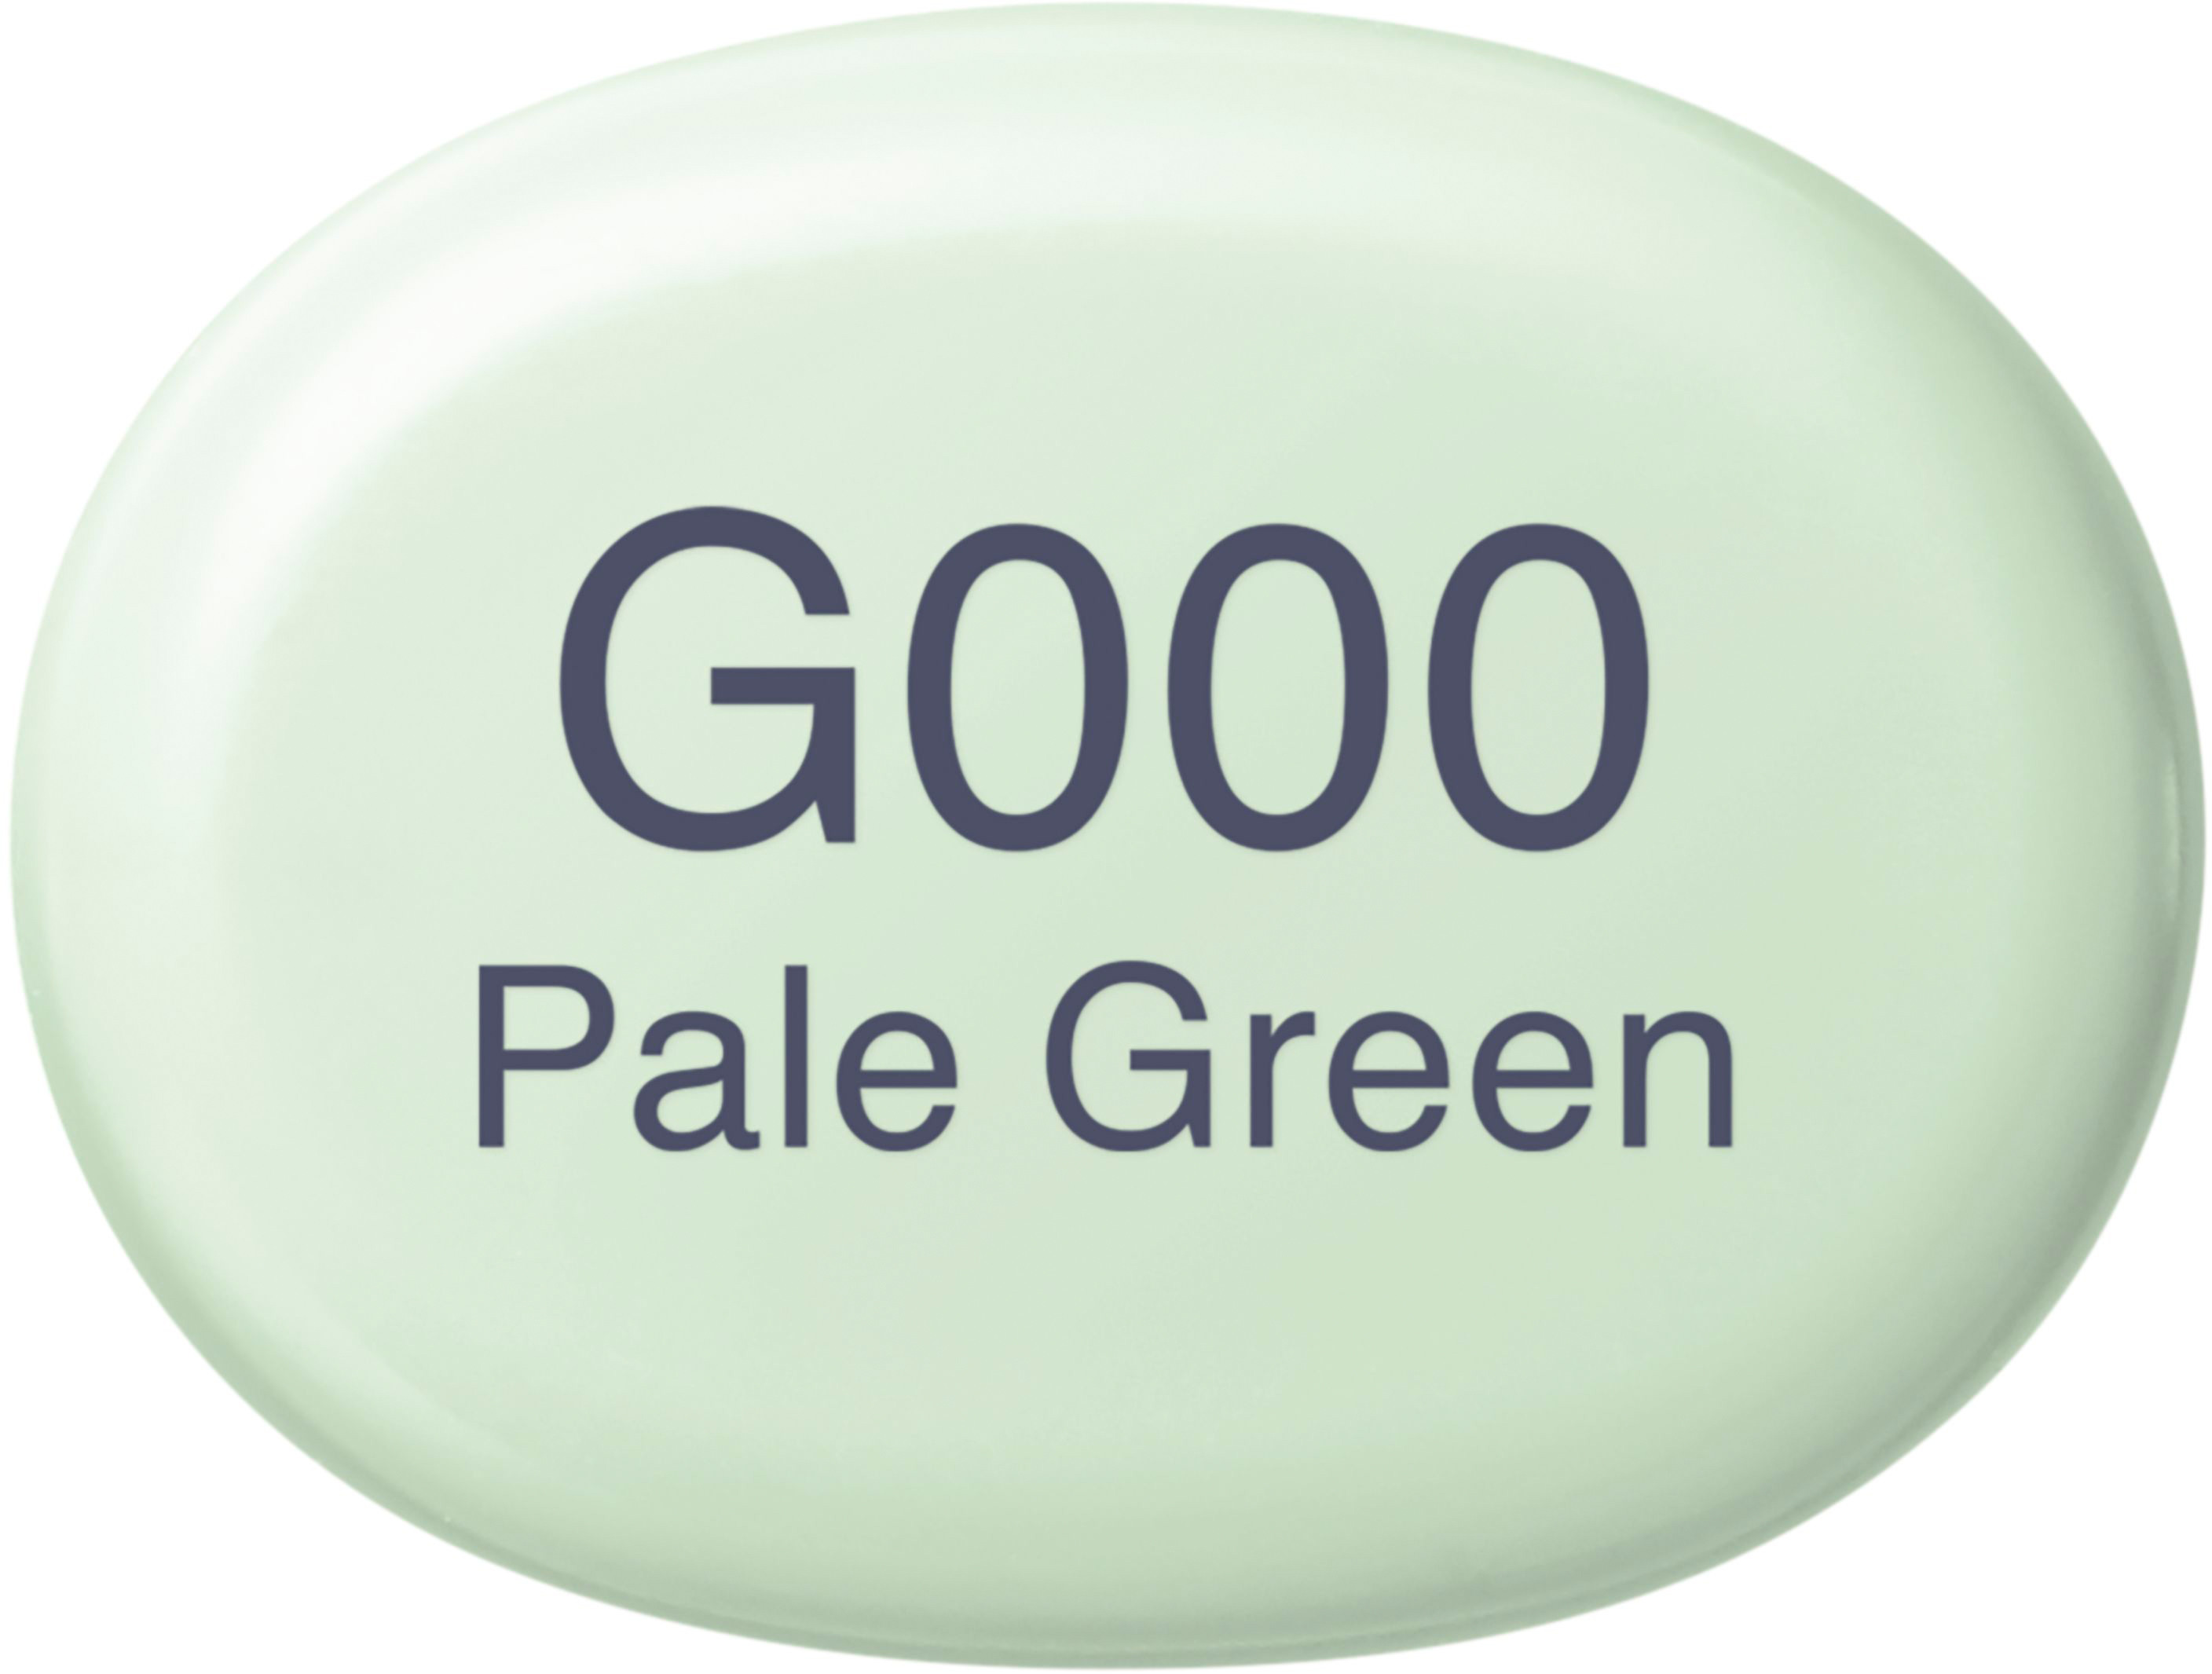 COPIC Marker Sketch 21075252 G000 - Pale Green